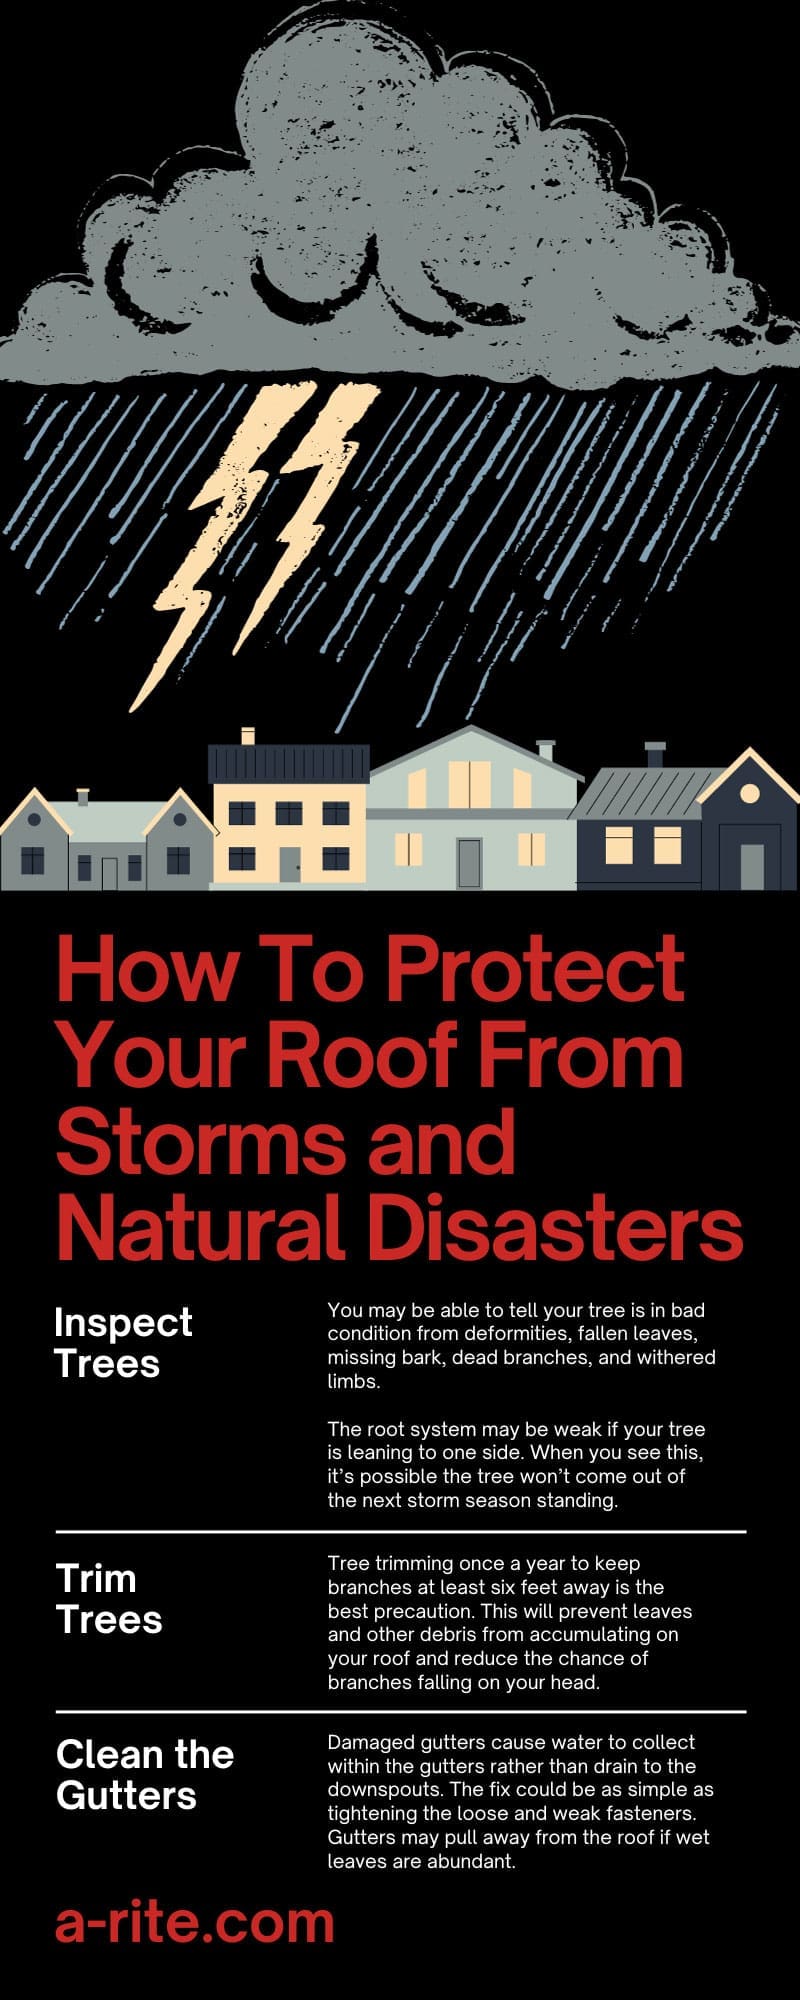 How To Protect Your Roof From Storms and Natural Disasters
